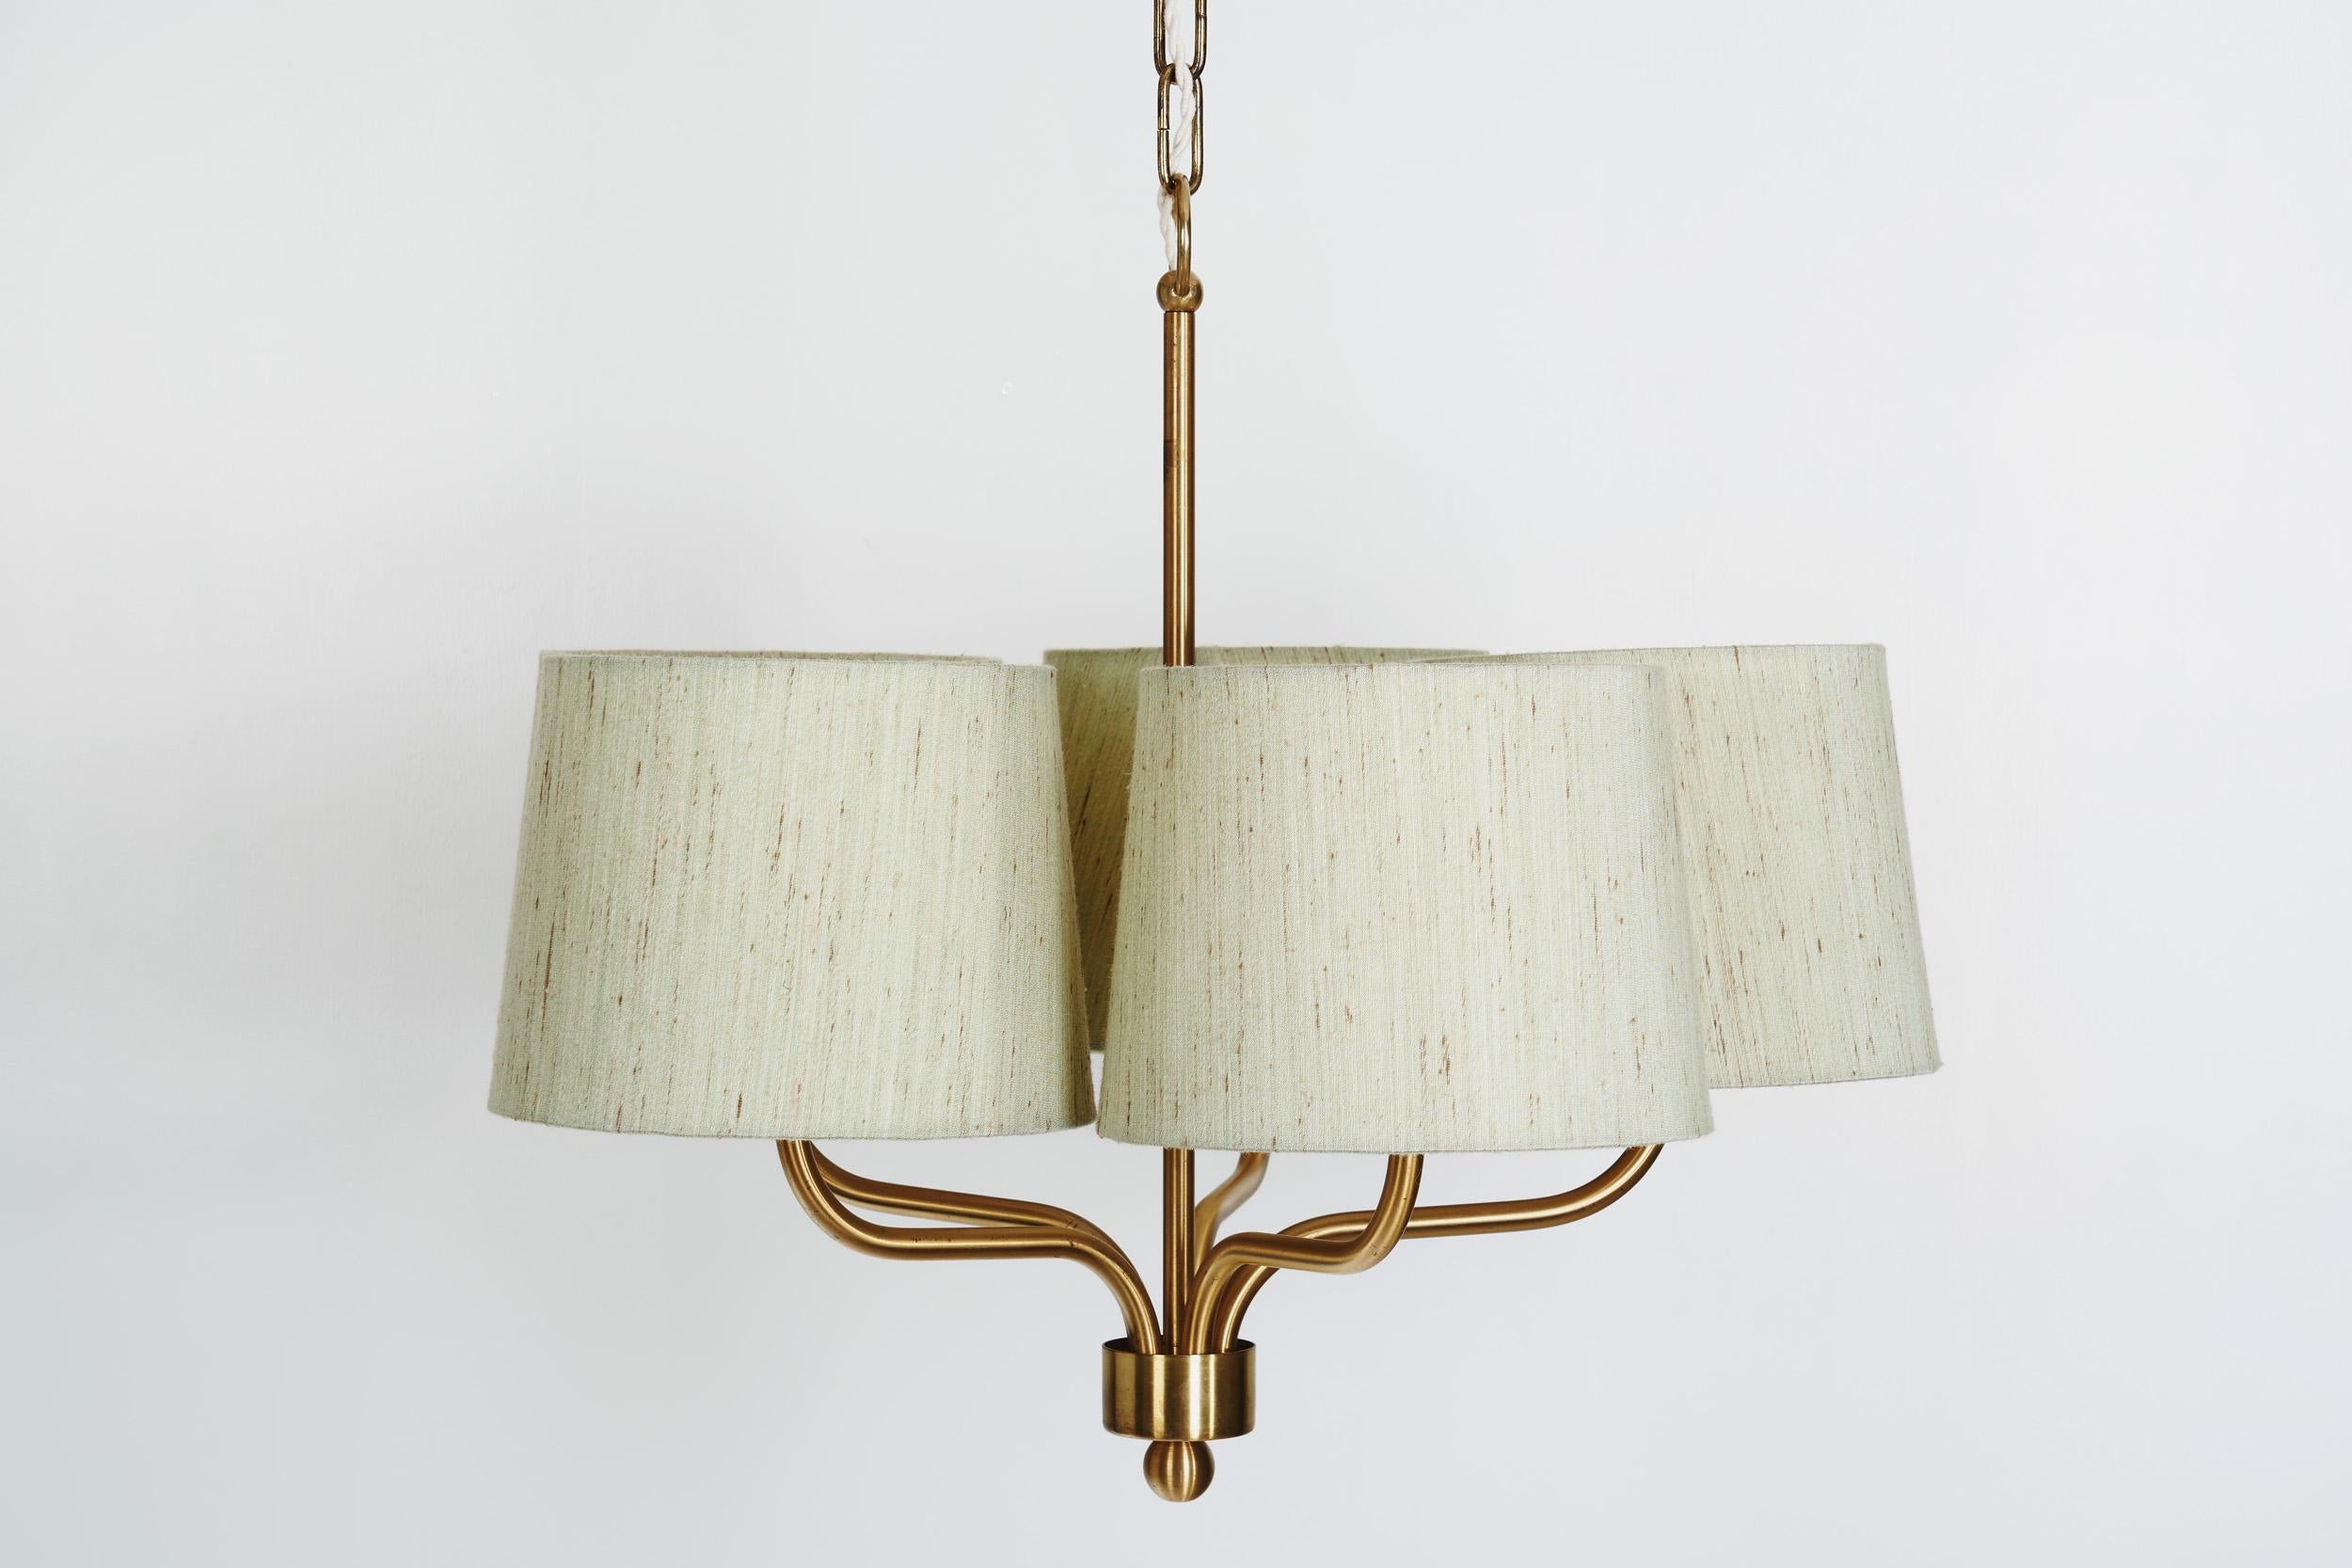 Five Arm Brass Ceiling Lamp with Fabric Shades by Luxus Vittsjö, Sweden 1960s For Sale 6